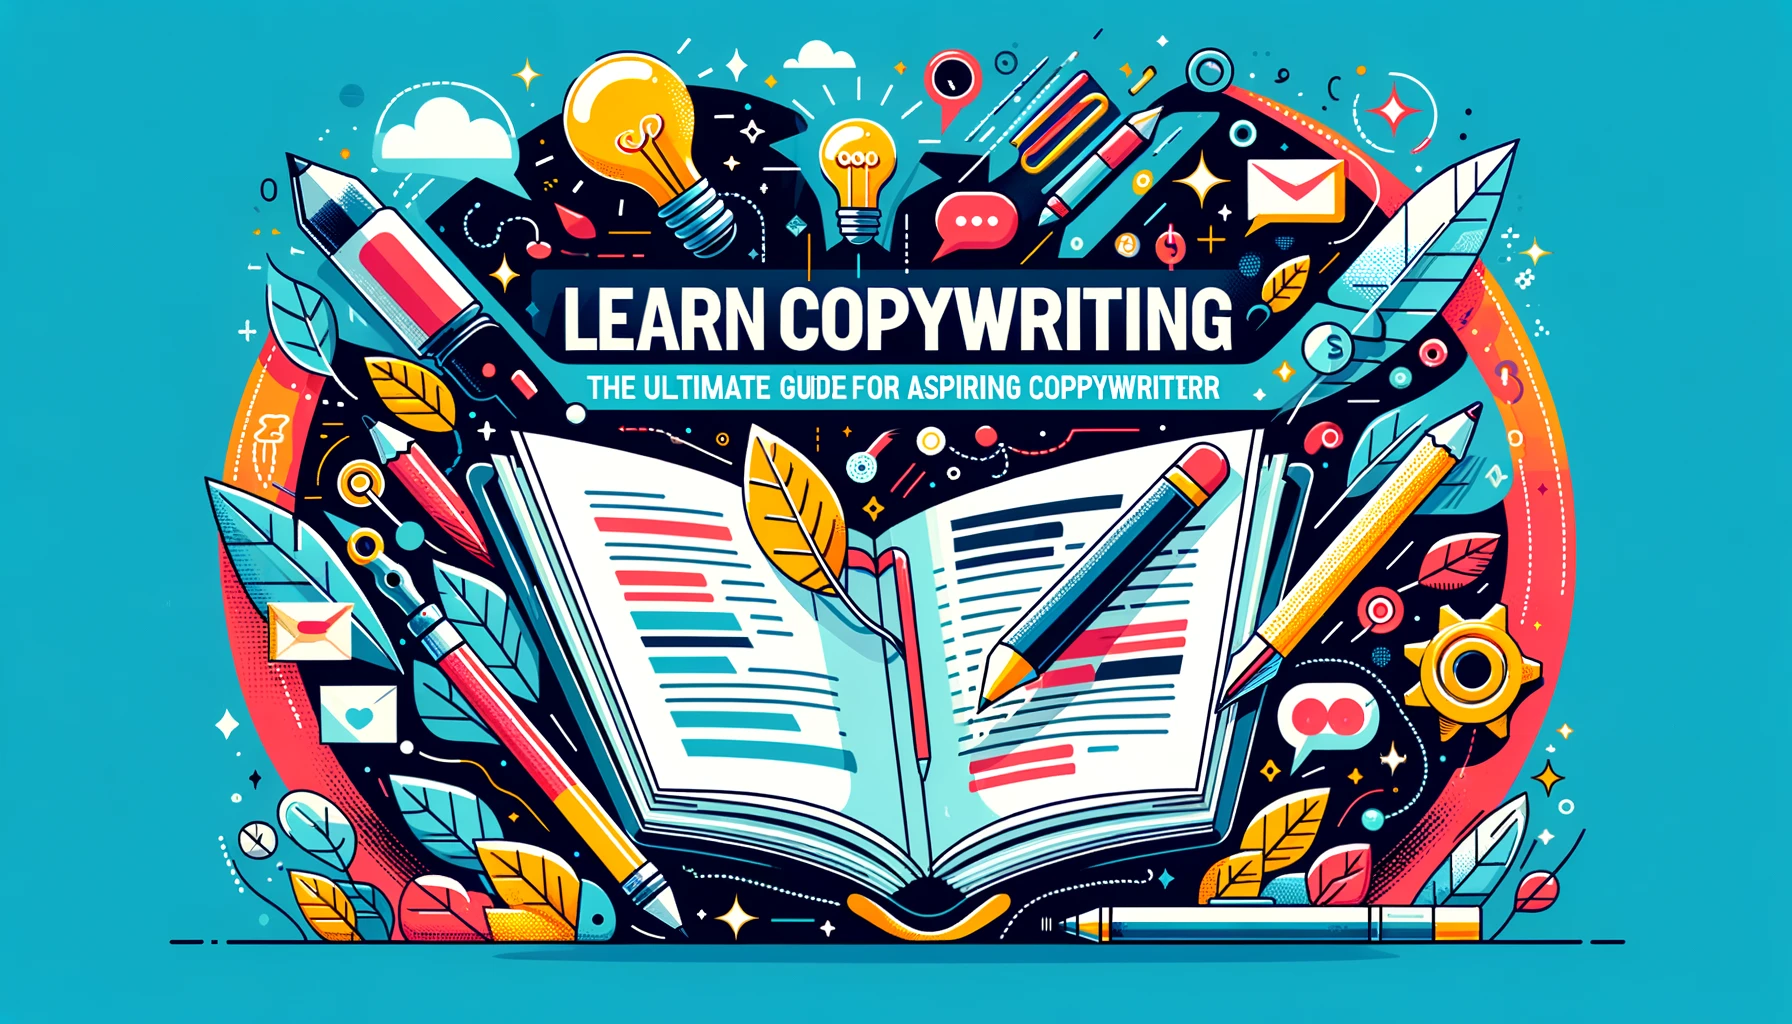 Learn Copywriting: The Ultimate Guide for Aspiring Copywriters